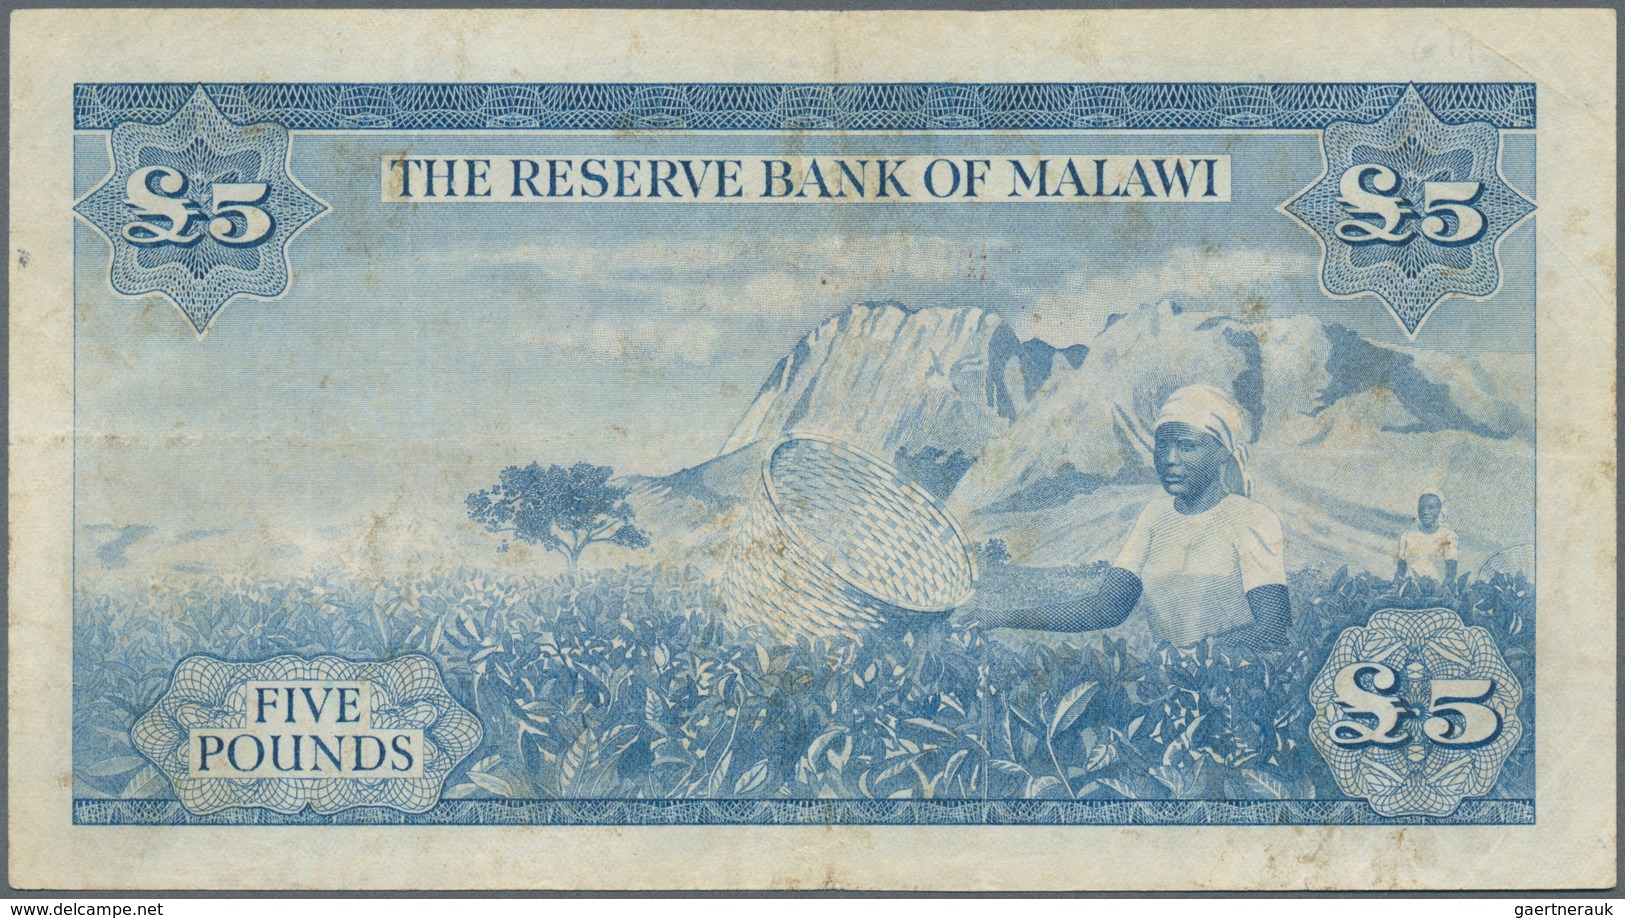 Malawi: Reserve Bank Of Malawi 5 Pounds L.1964, P.4, Very Popular And Rare Banknote, Still Great Con - Malawi